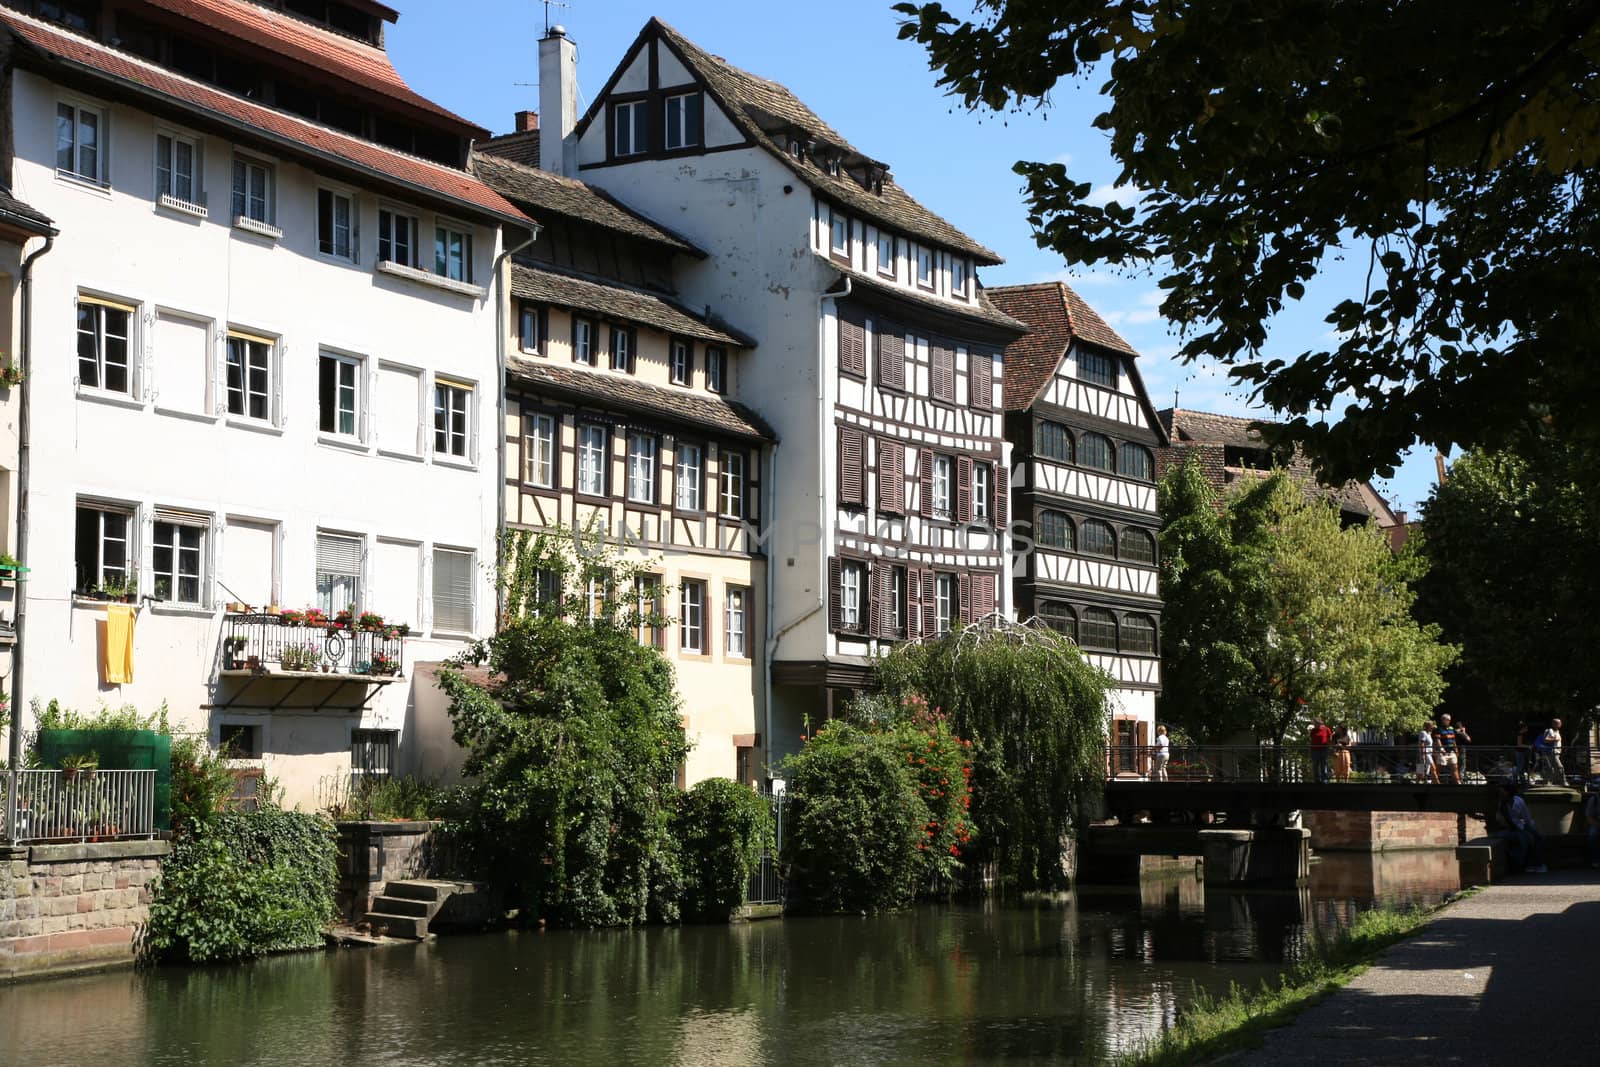 Picturesque Petite France in Strasbourg - France